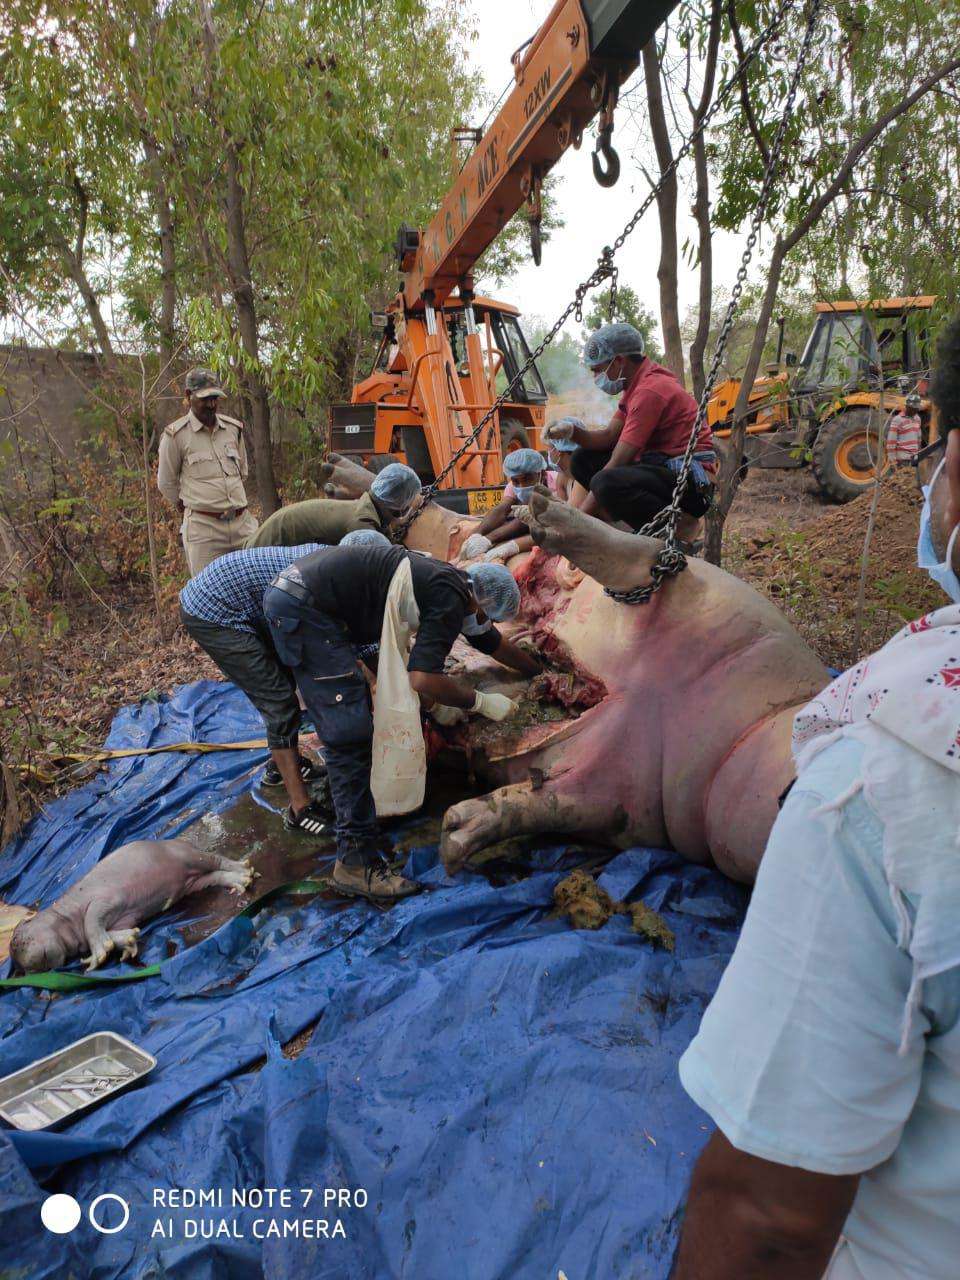 A separate committee will be formed to investigate death of hippo